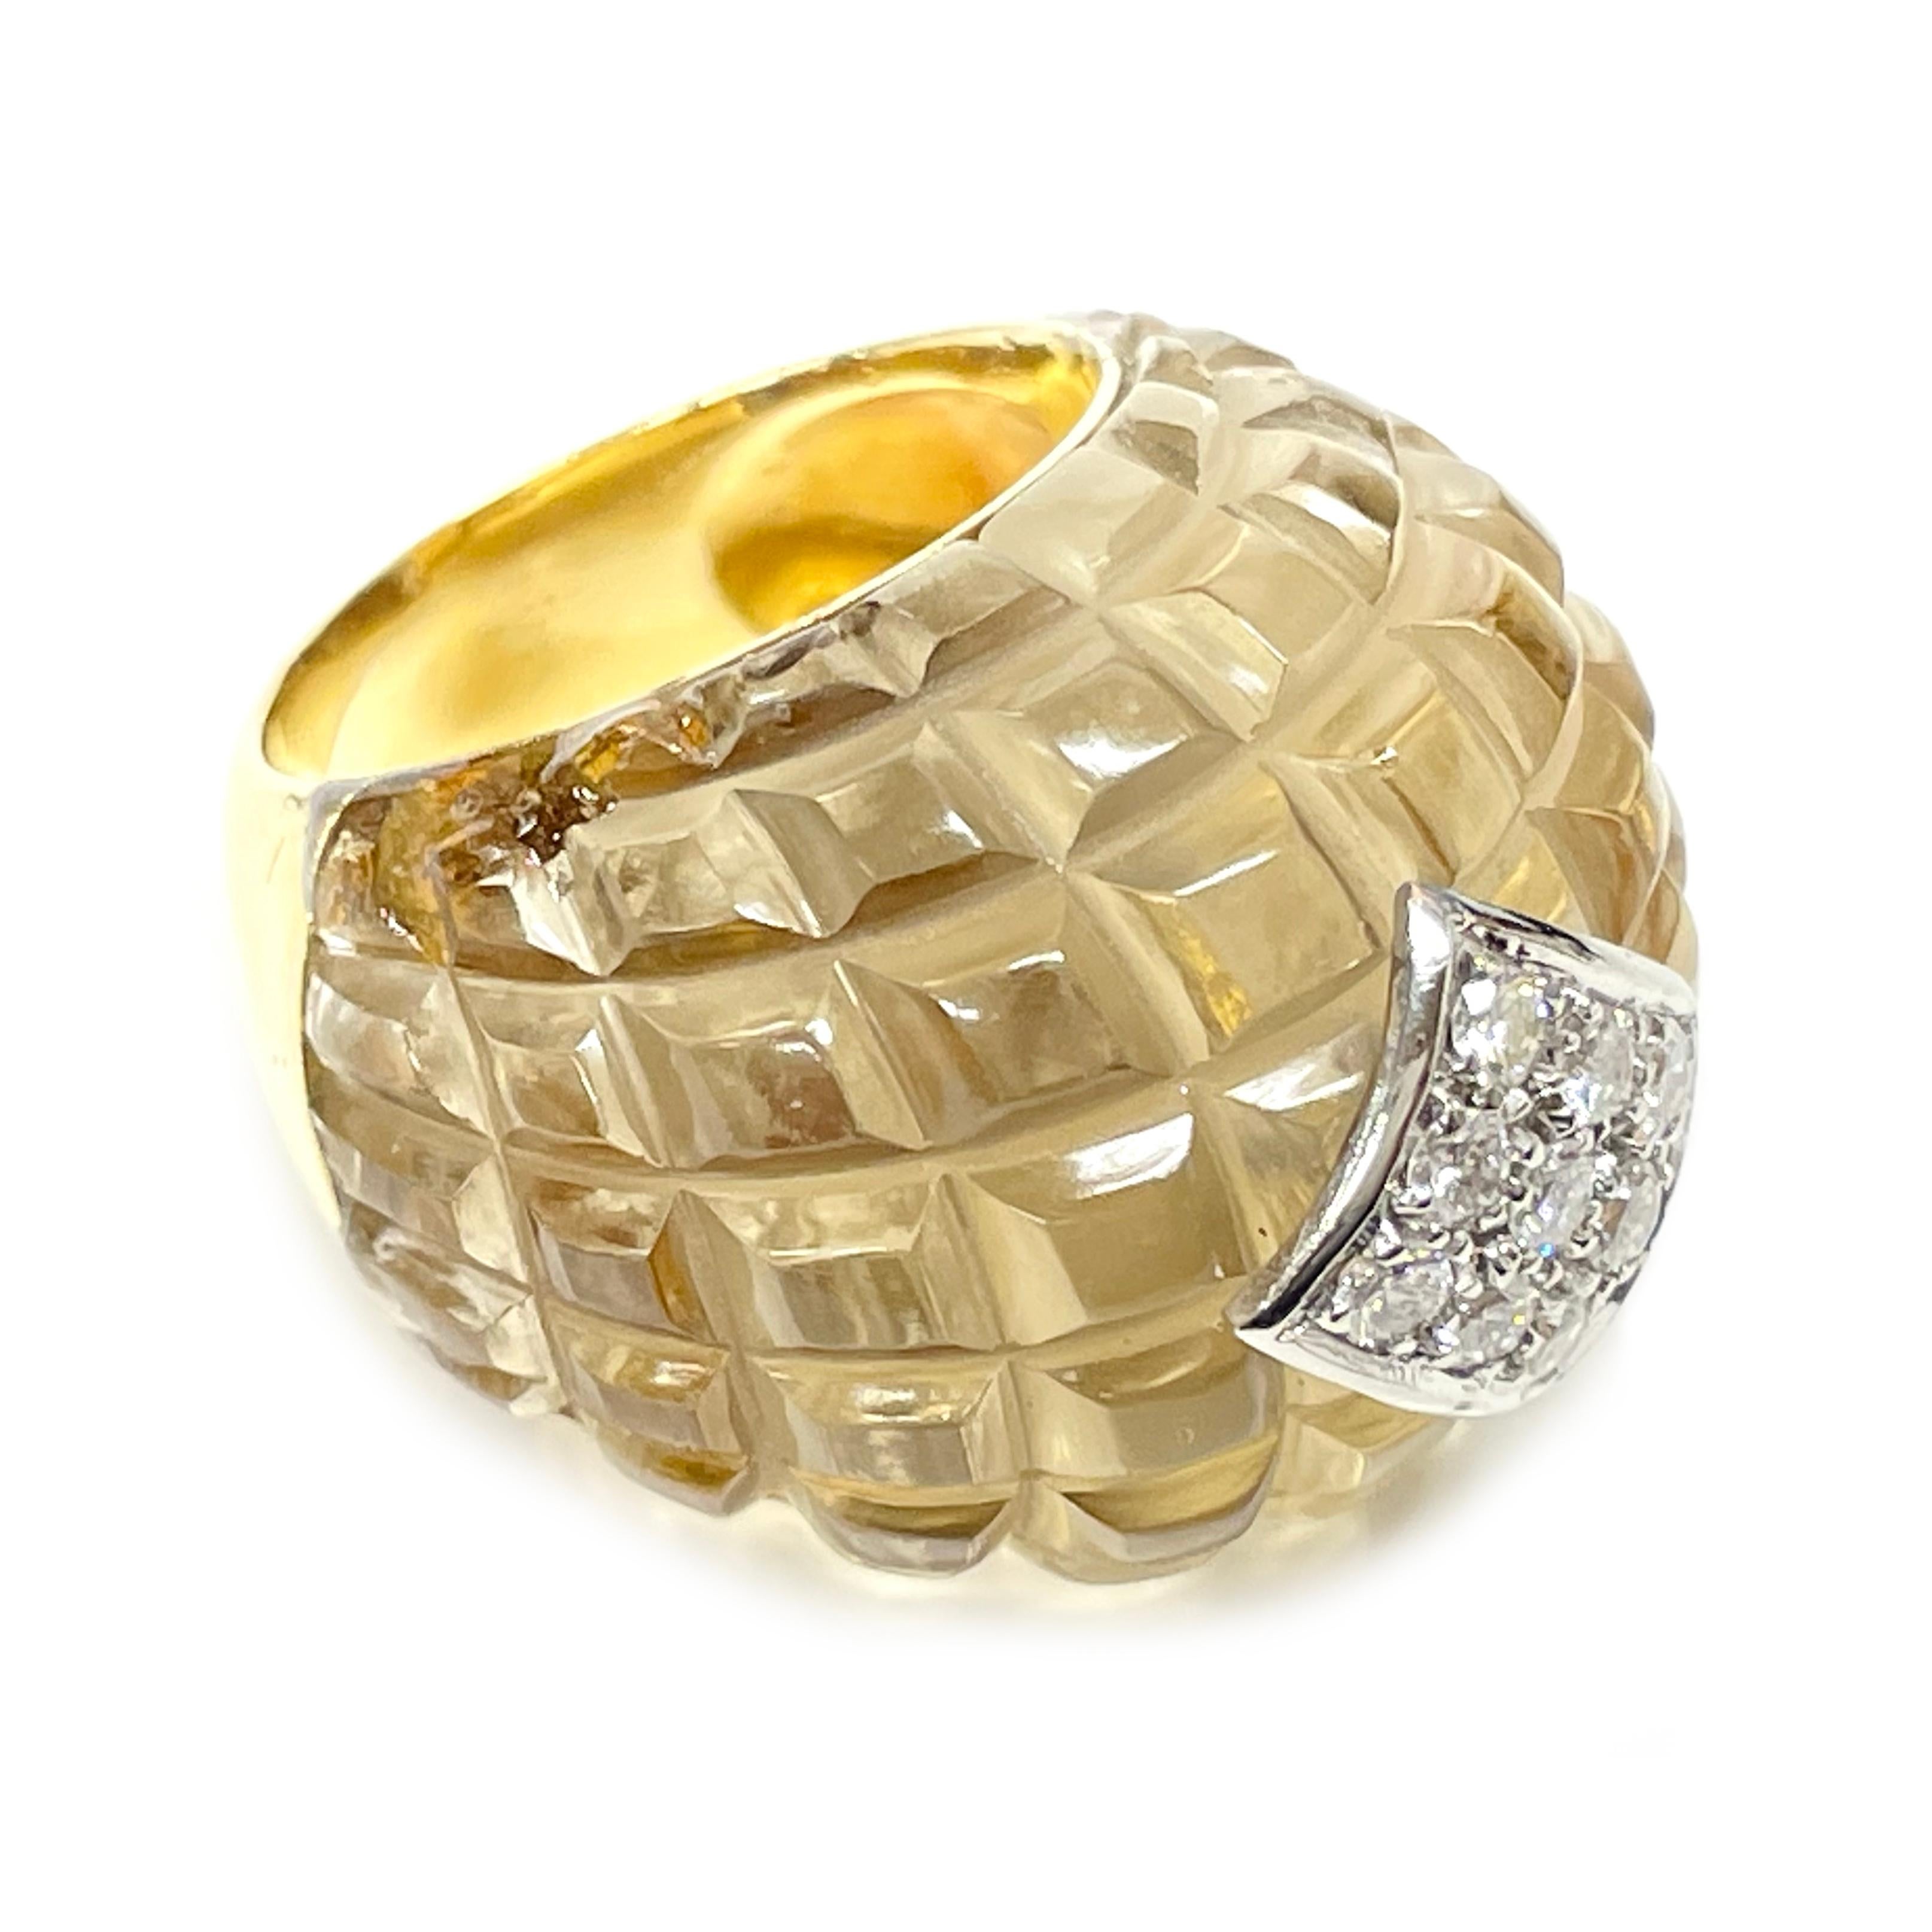 18 Karat Yellow Gold Diamond Quartz Ring. The front half of the ring features a clear faceted quartz design with a cluster of nine round diamonds pave set in white gold at the center. The diamonds measure 2.0mm for a total carat weight of 0.27tcw.